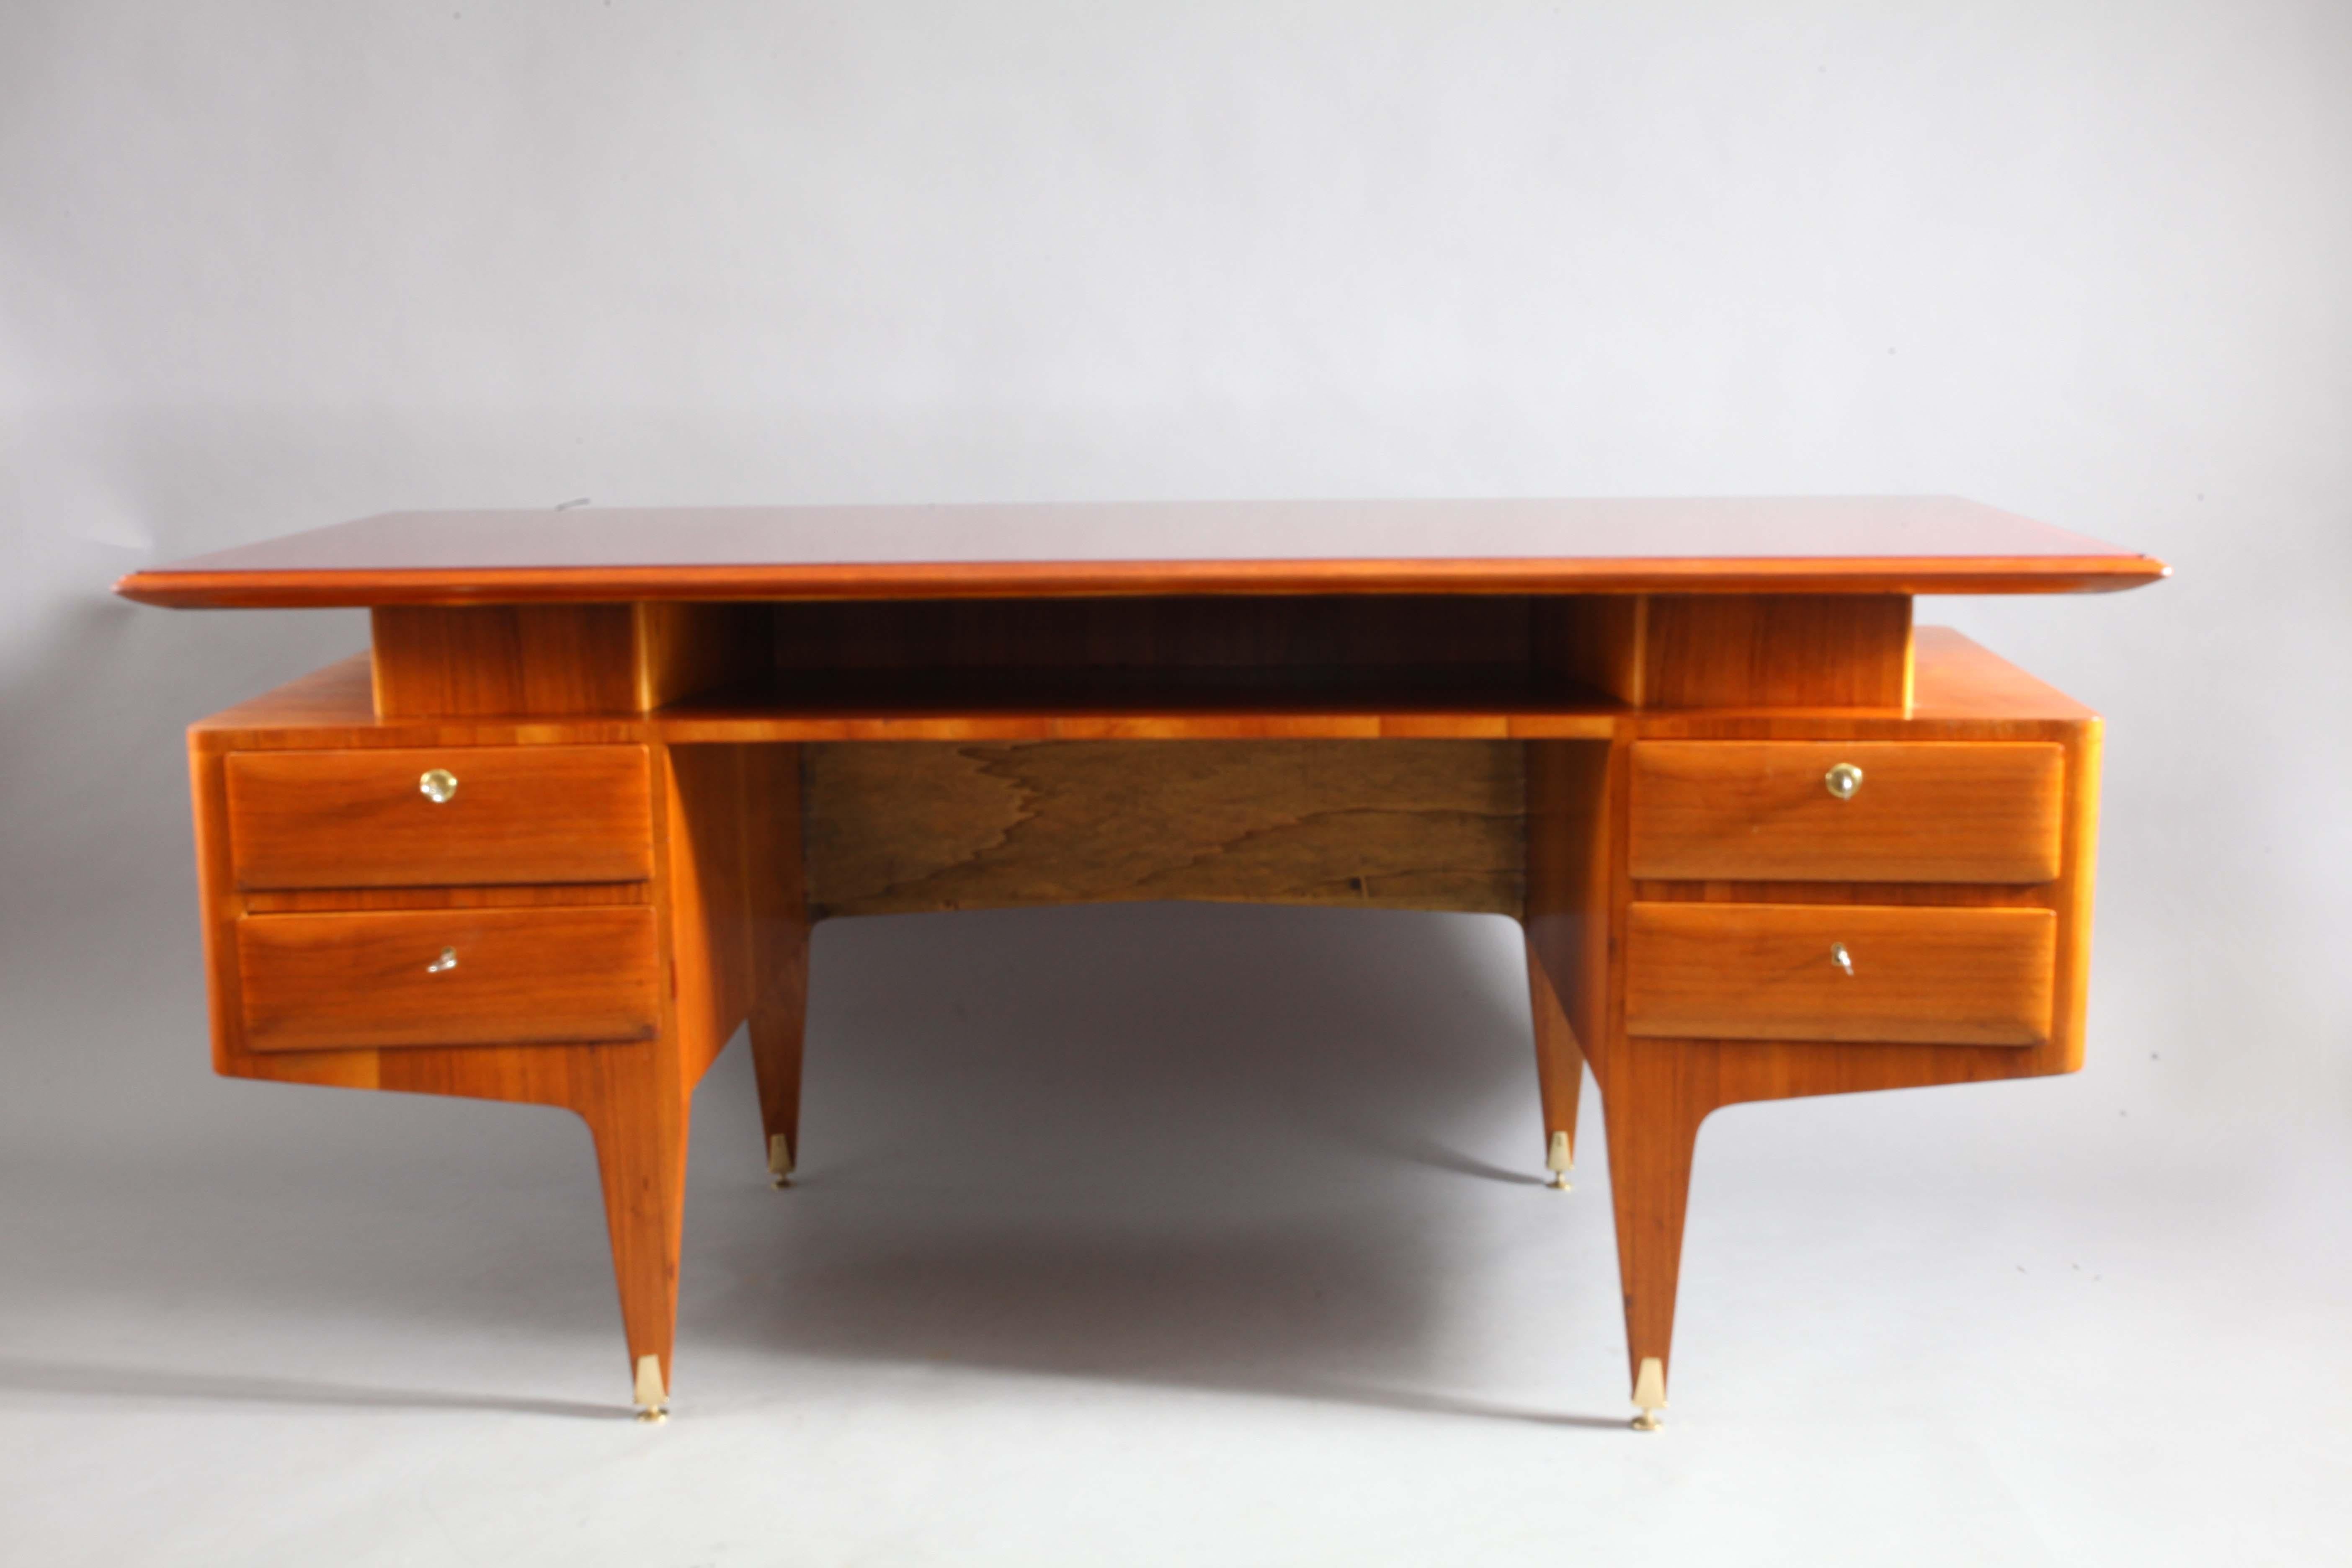 Executive rosewood writing desk,
Vittorio Dassi,
Italy, 1950.
Four drawers,
brass legs height adjustable,
red glass top
Measures: Width 183 cm, depth 90 cm, height 79 cm.